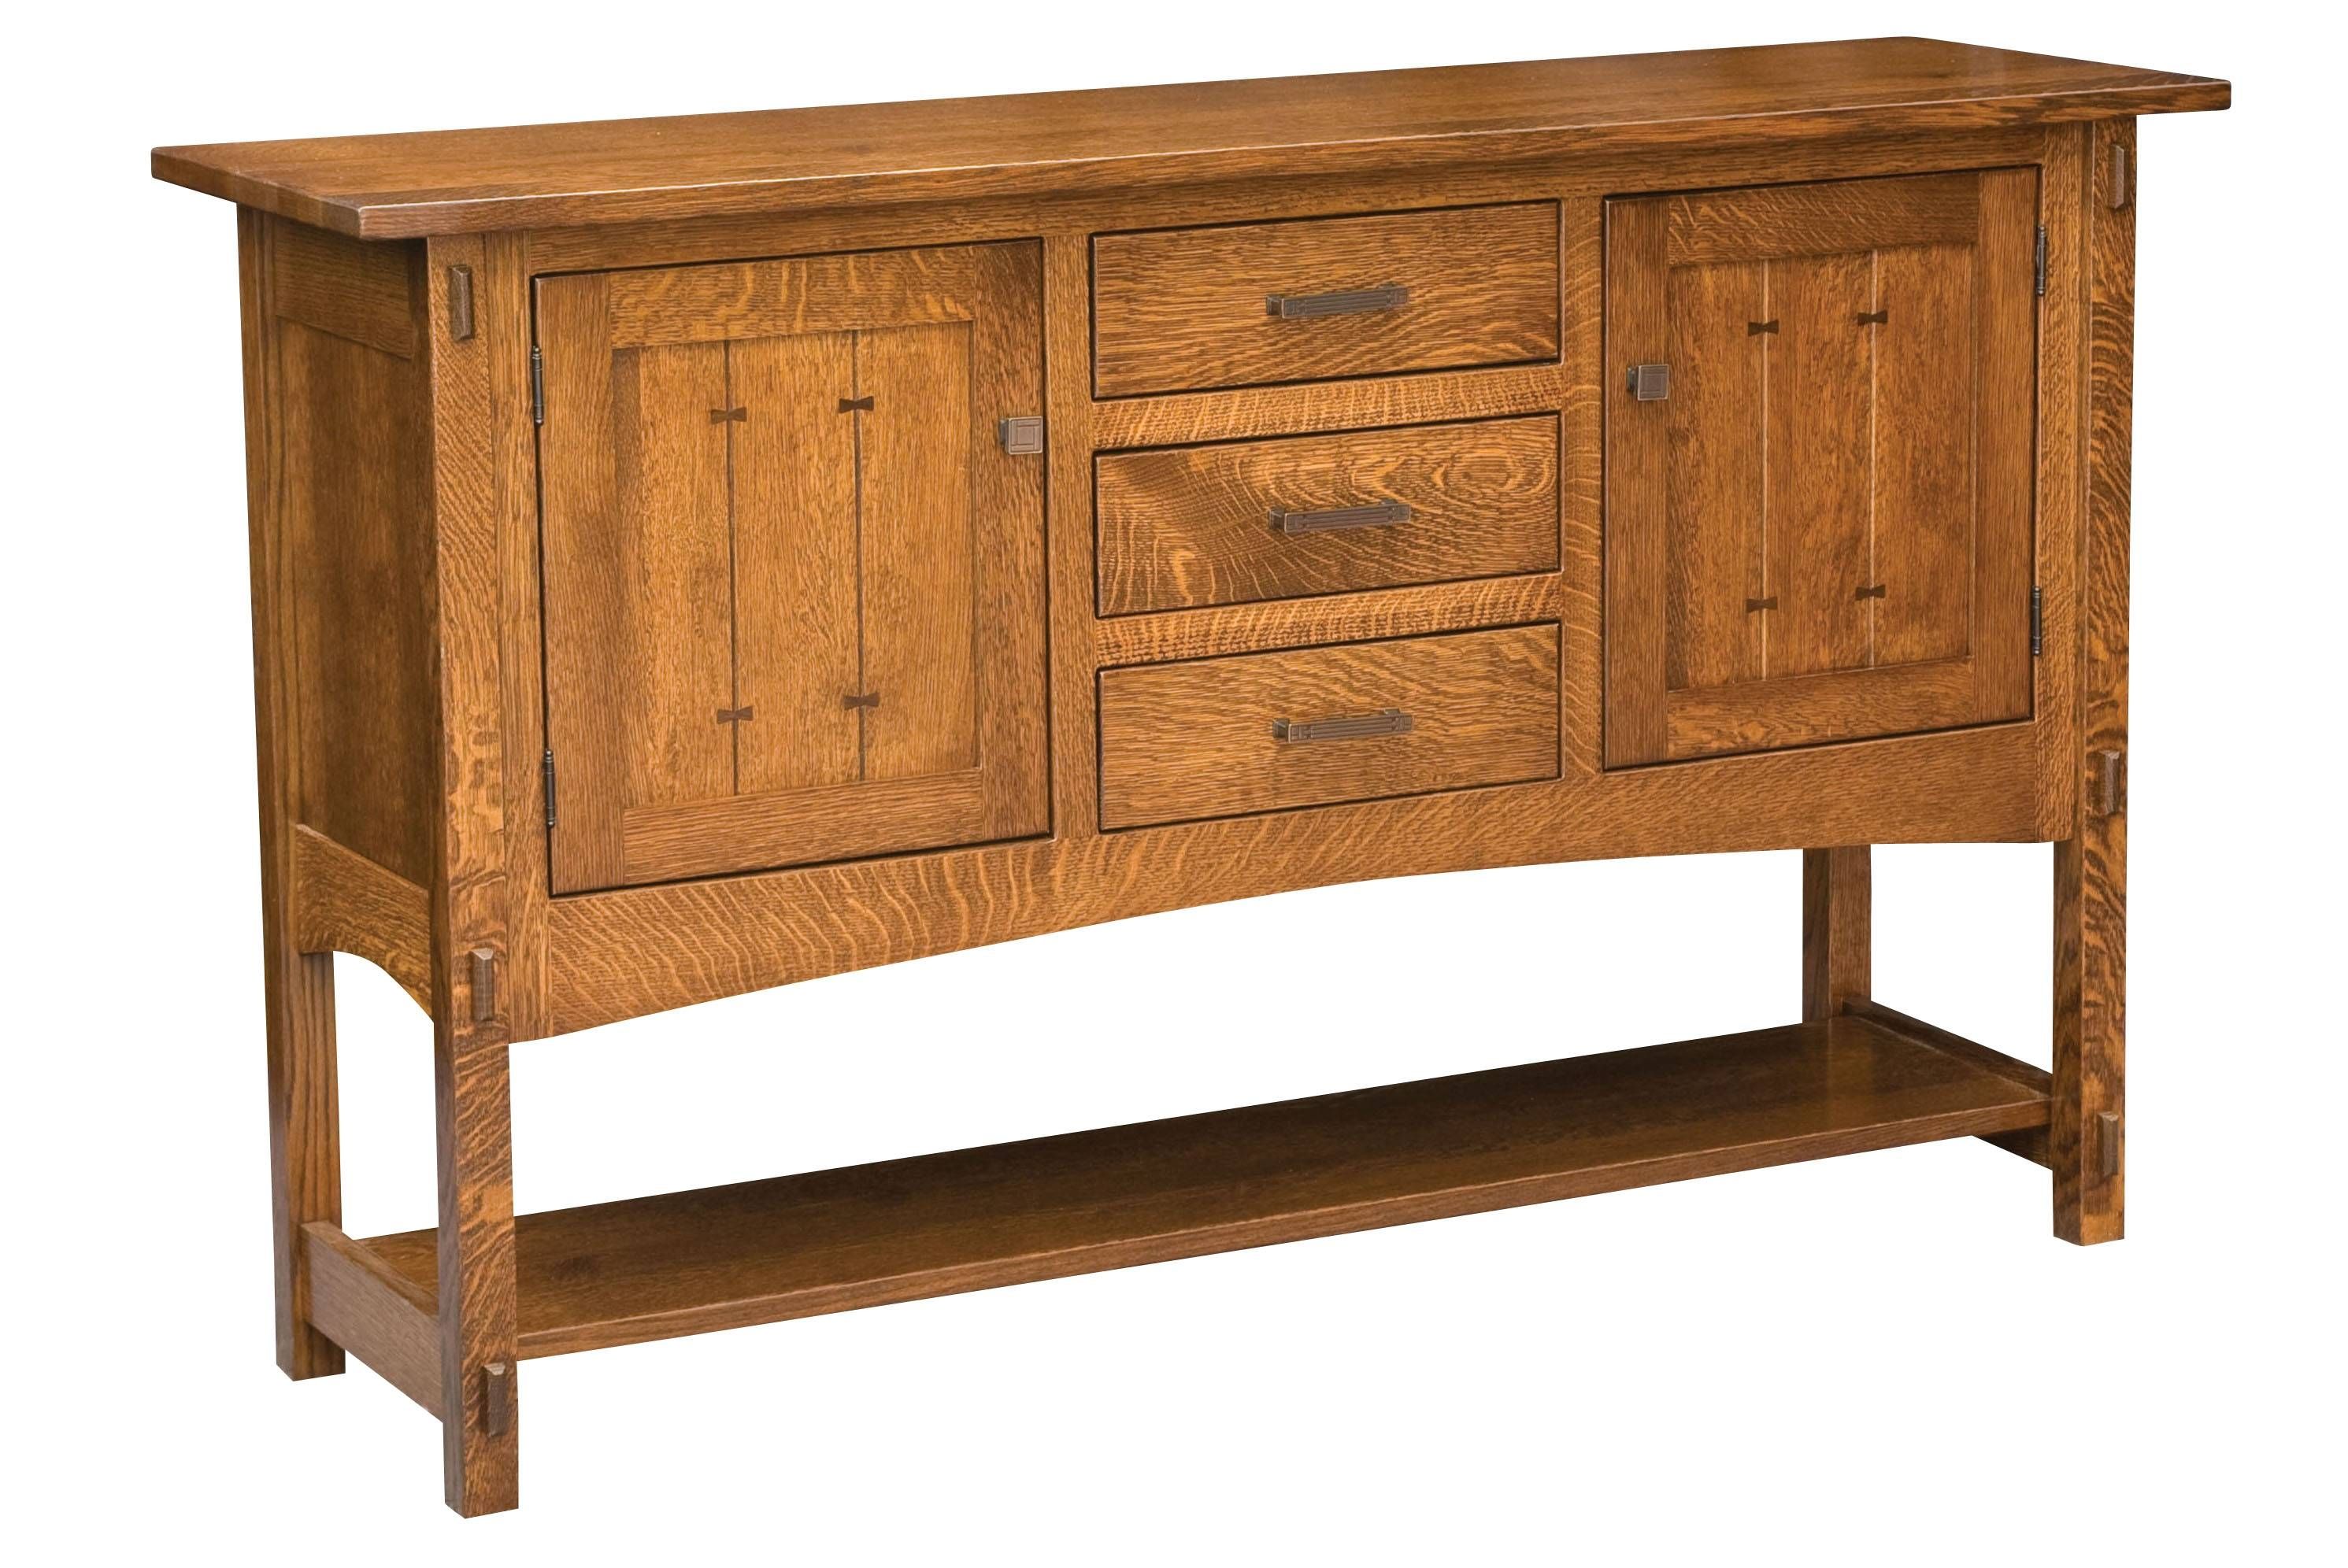 This Sideboard Builtthe Amish For The Mission Works Features In Most Up To Date Mission Style Sideboards (View 5 of 15)